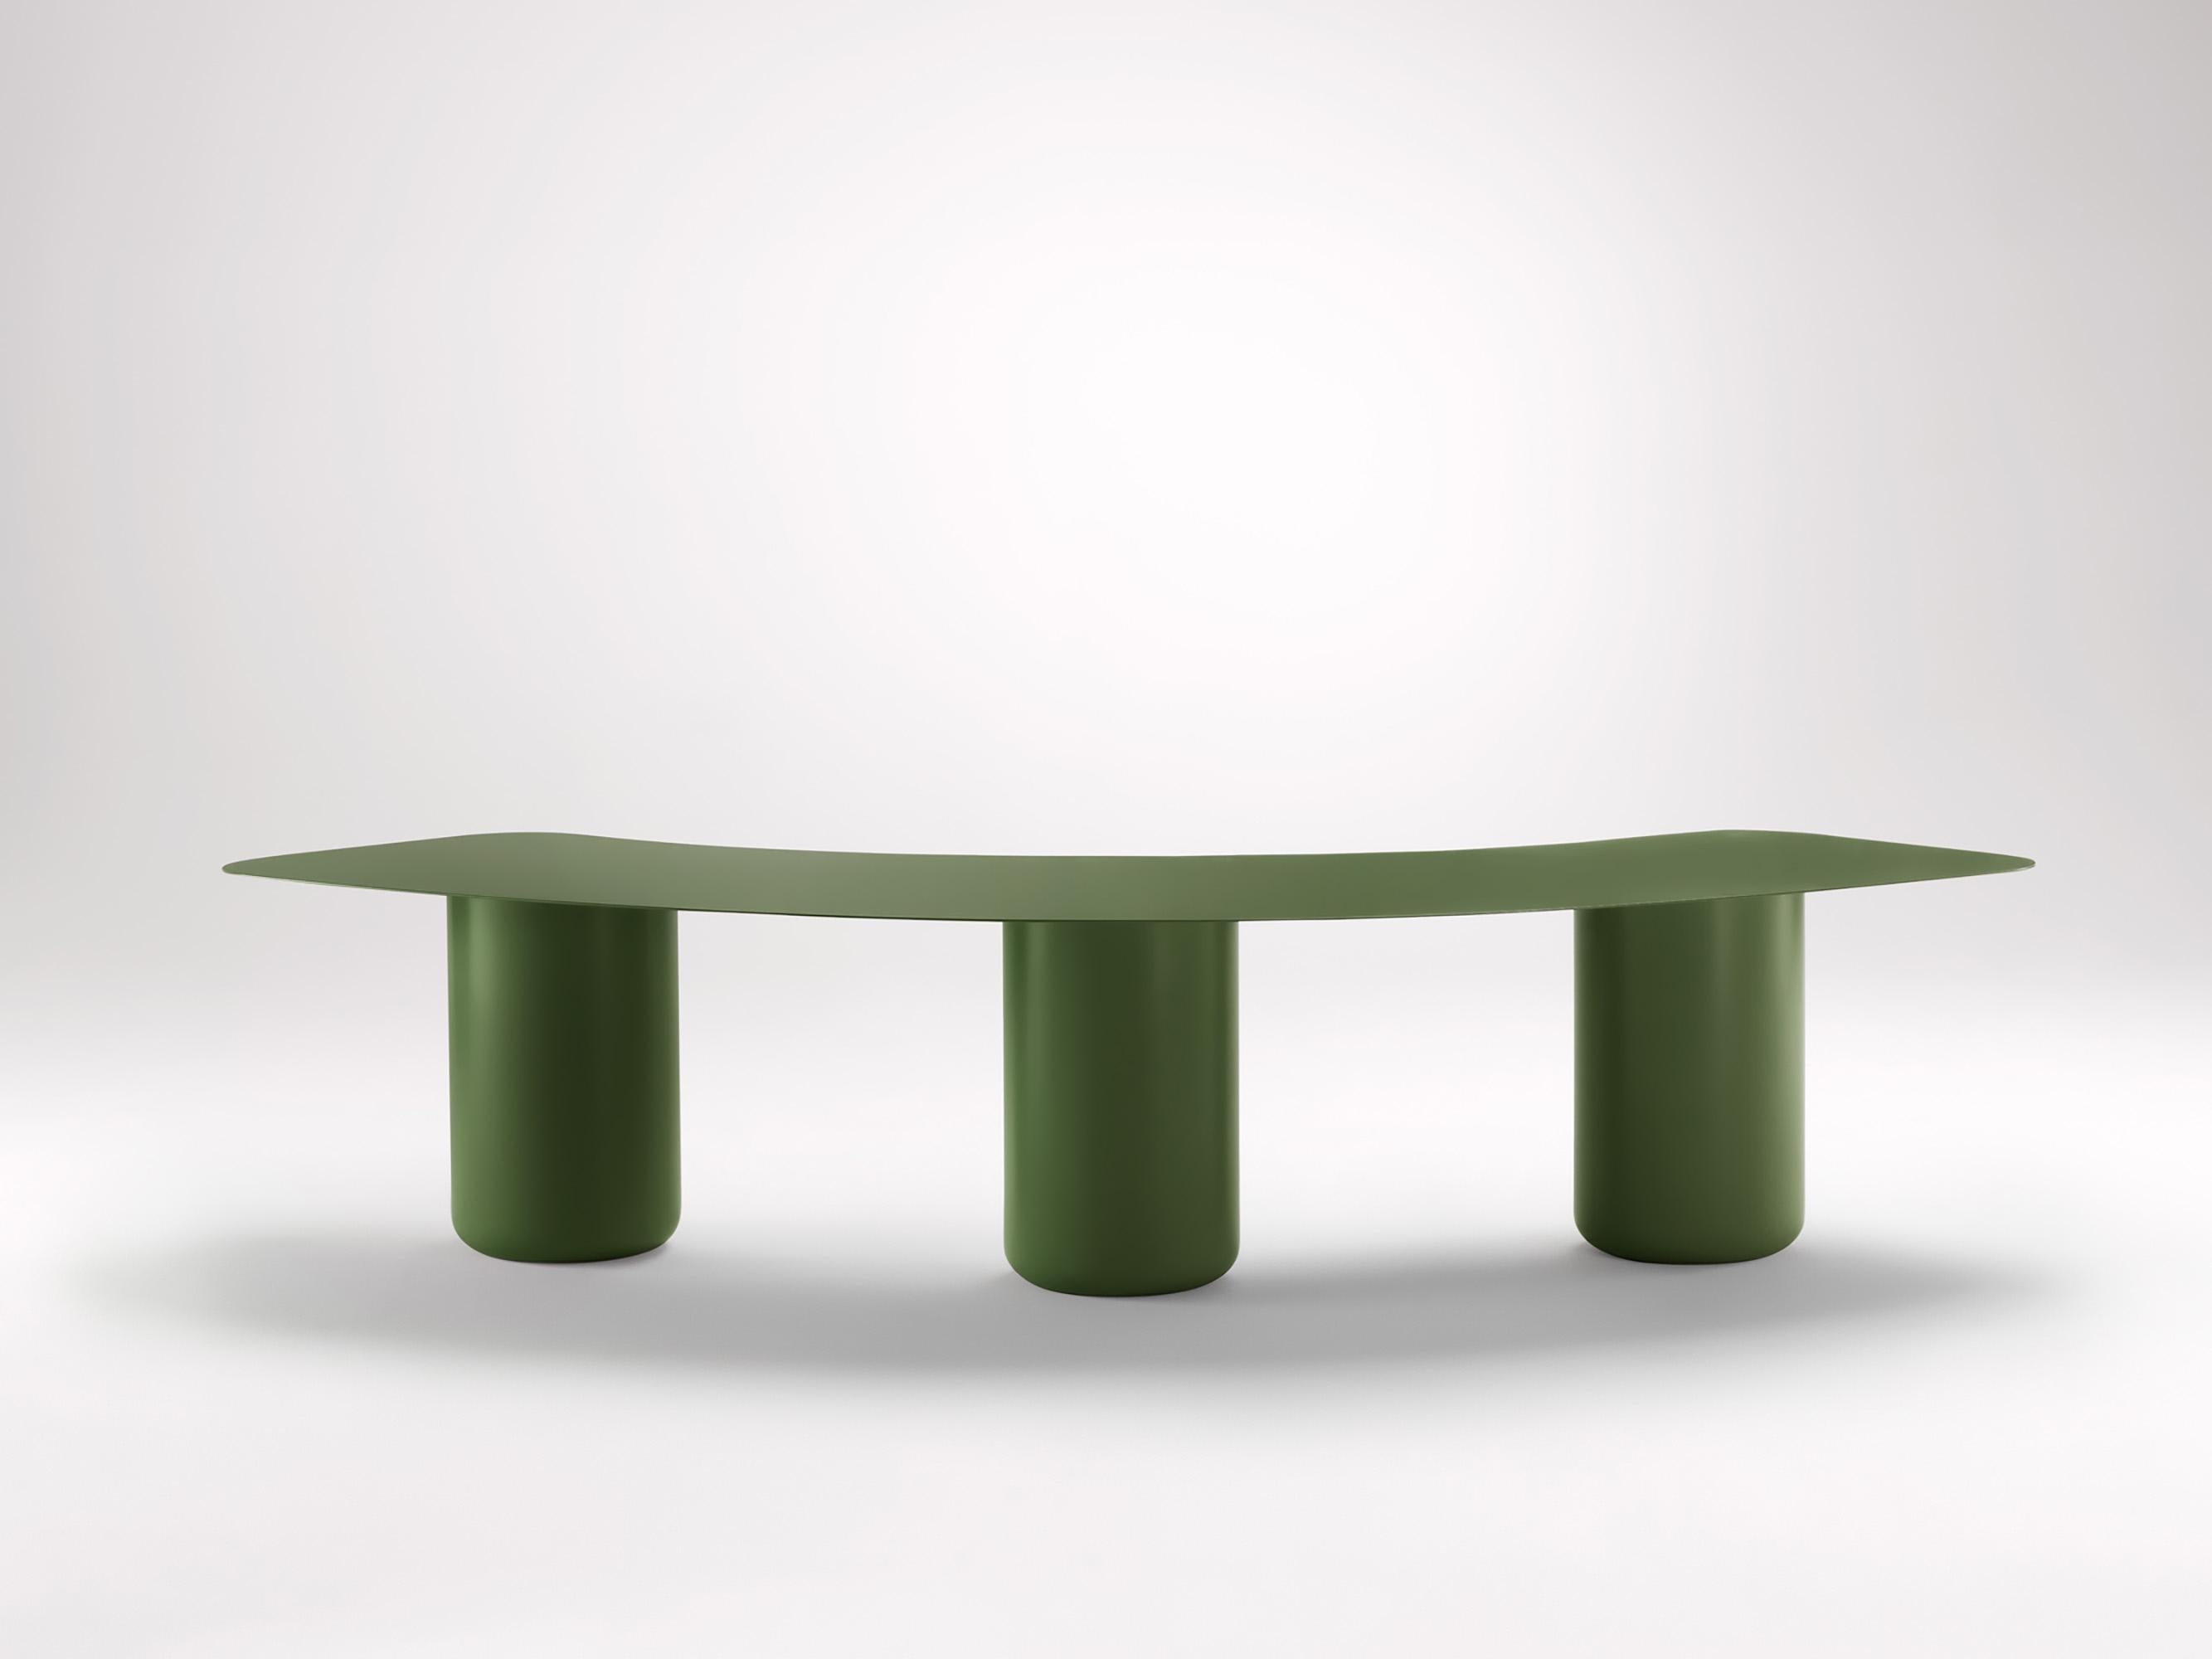 Large Olive Green Curved Bench by Coco Flip
Dimensions: D 75 x W 200 x H 42 cm
Materials: Mild steel, powder-coated with zinc undercoat. 
Weight: 44 kg

Coco Flip is a Melbourne based furniture and lighting design studio, run by us, Kate Stokes and